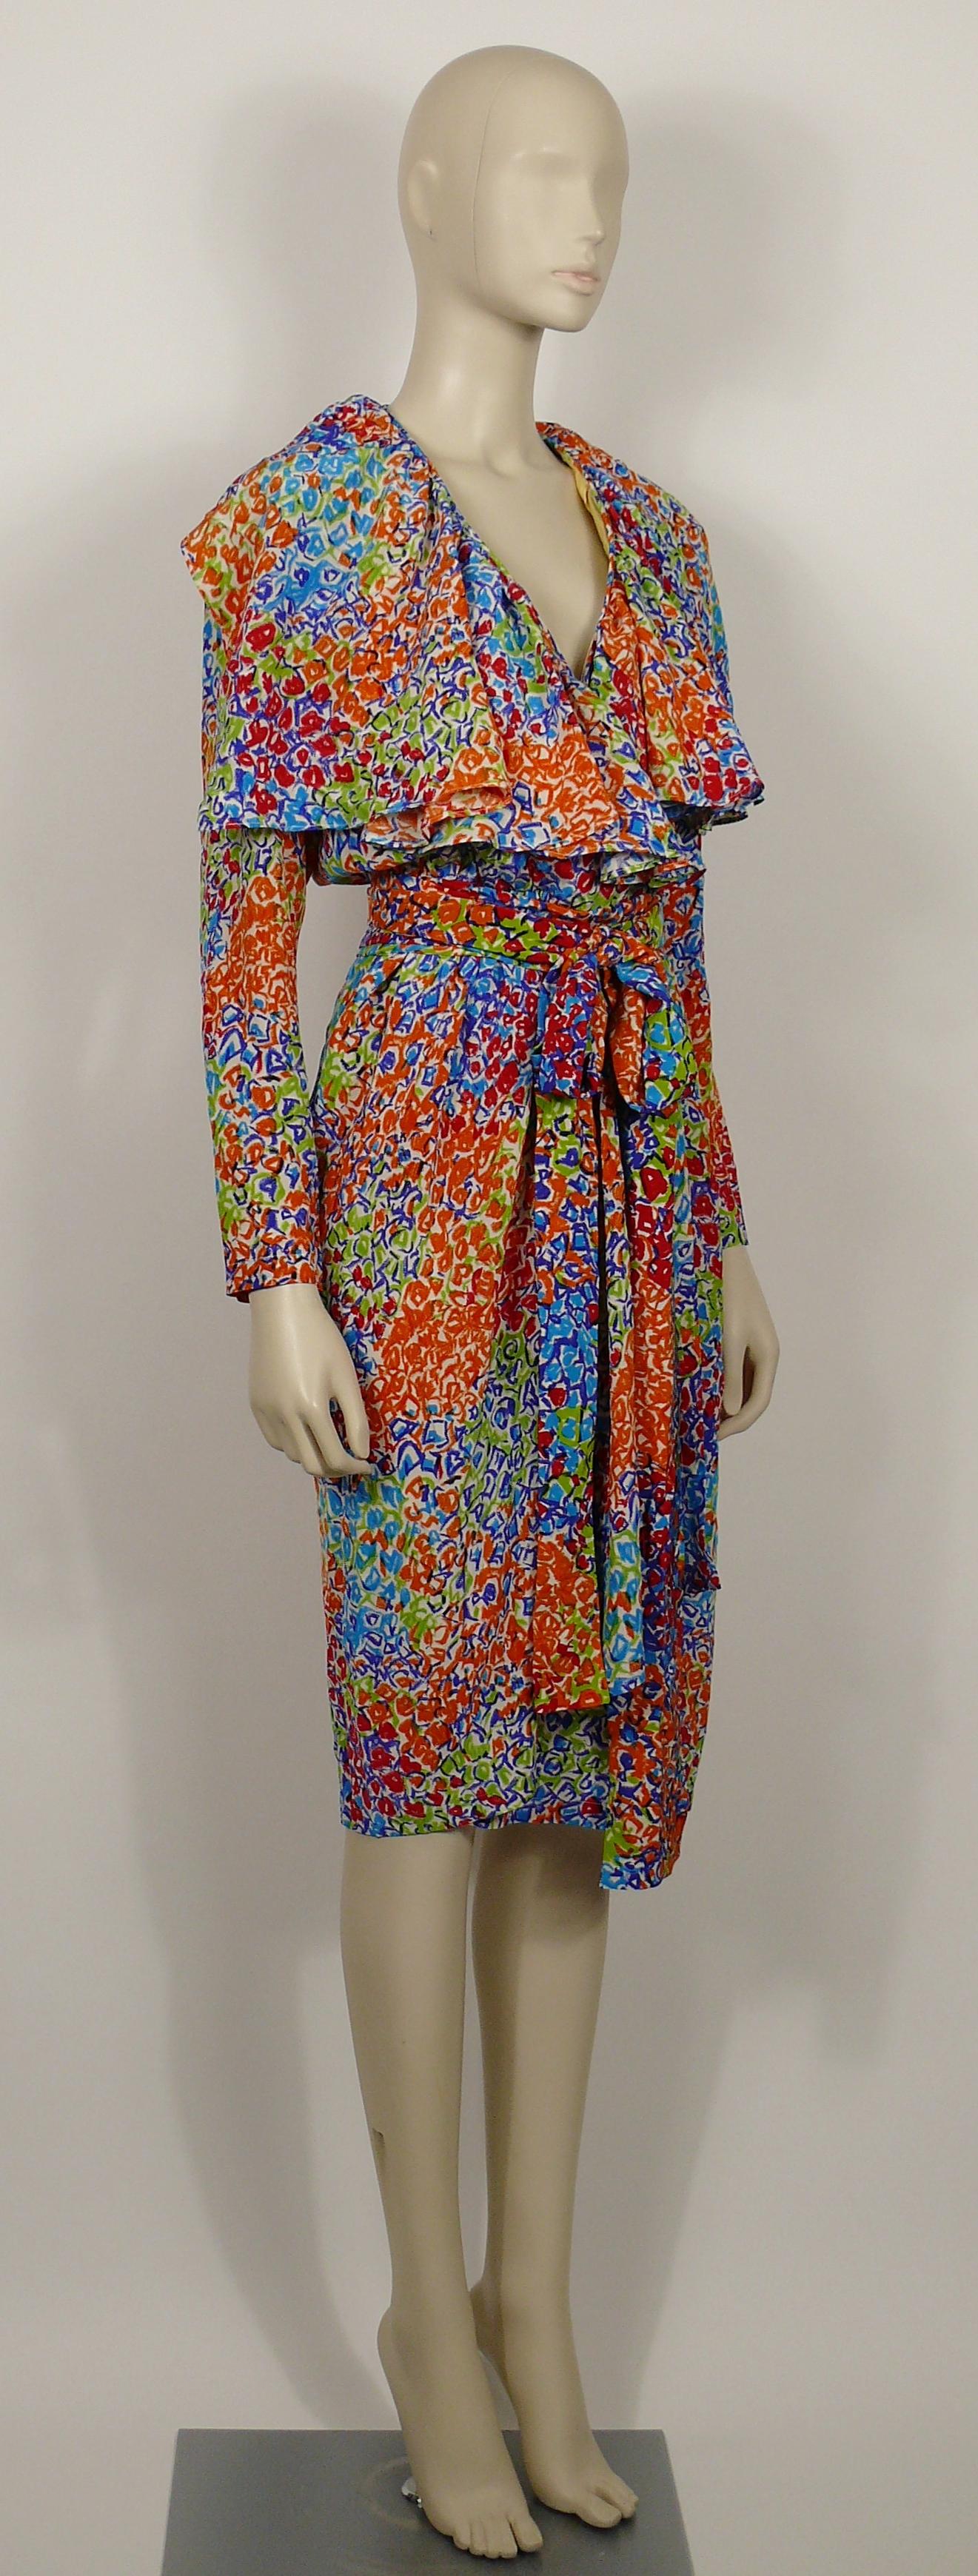 YVES SAINT LAURENT Rive Gauche vintage multicolored abstract floral print wrap silk dress.

Spring/Summer 1989 Ready-to-Wear collection.

This dress features :
- Wrap front.
- Oversized shawl collar.
- Long sleeves.
- Hidden hooks and snap button